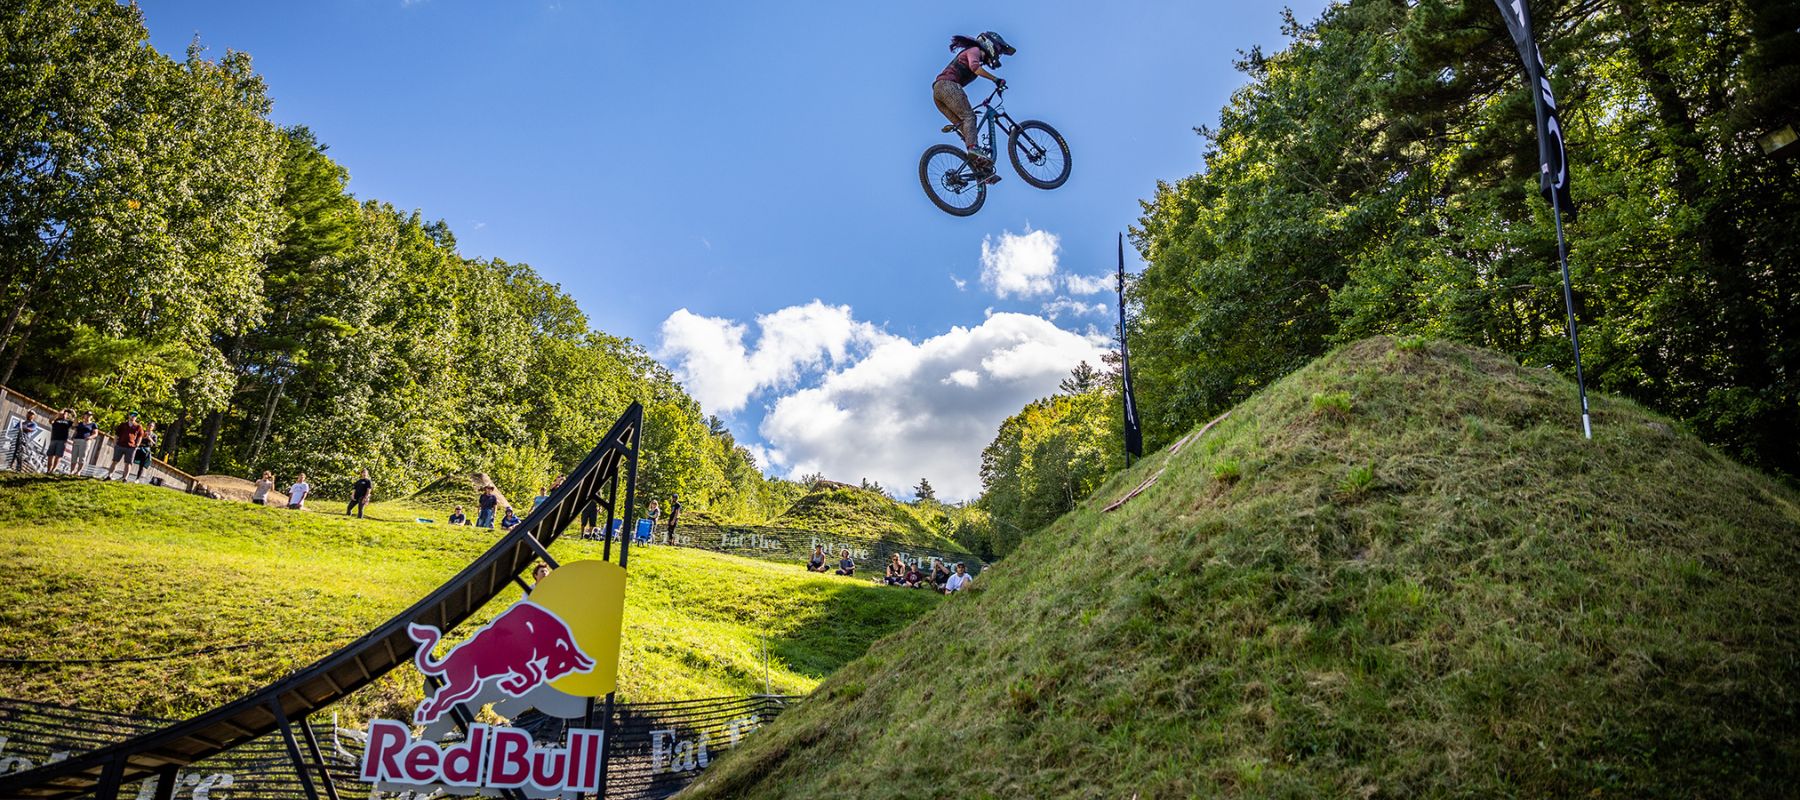 Kajay Rooke launching off a bike ramp with forest scenery in the background